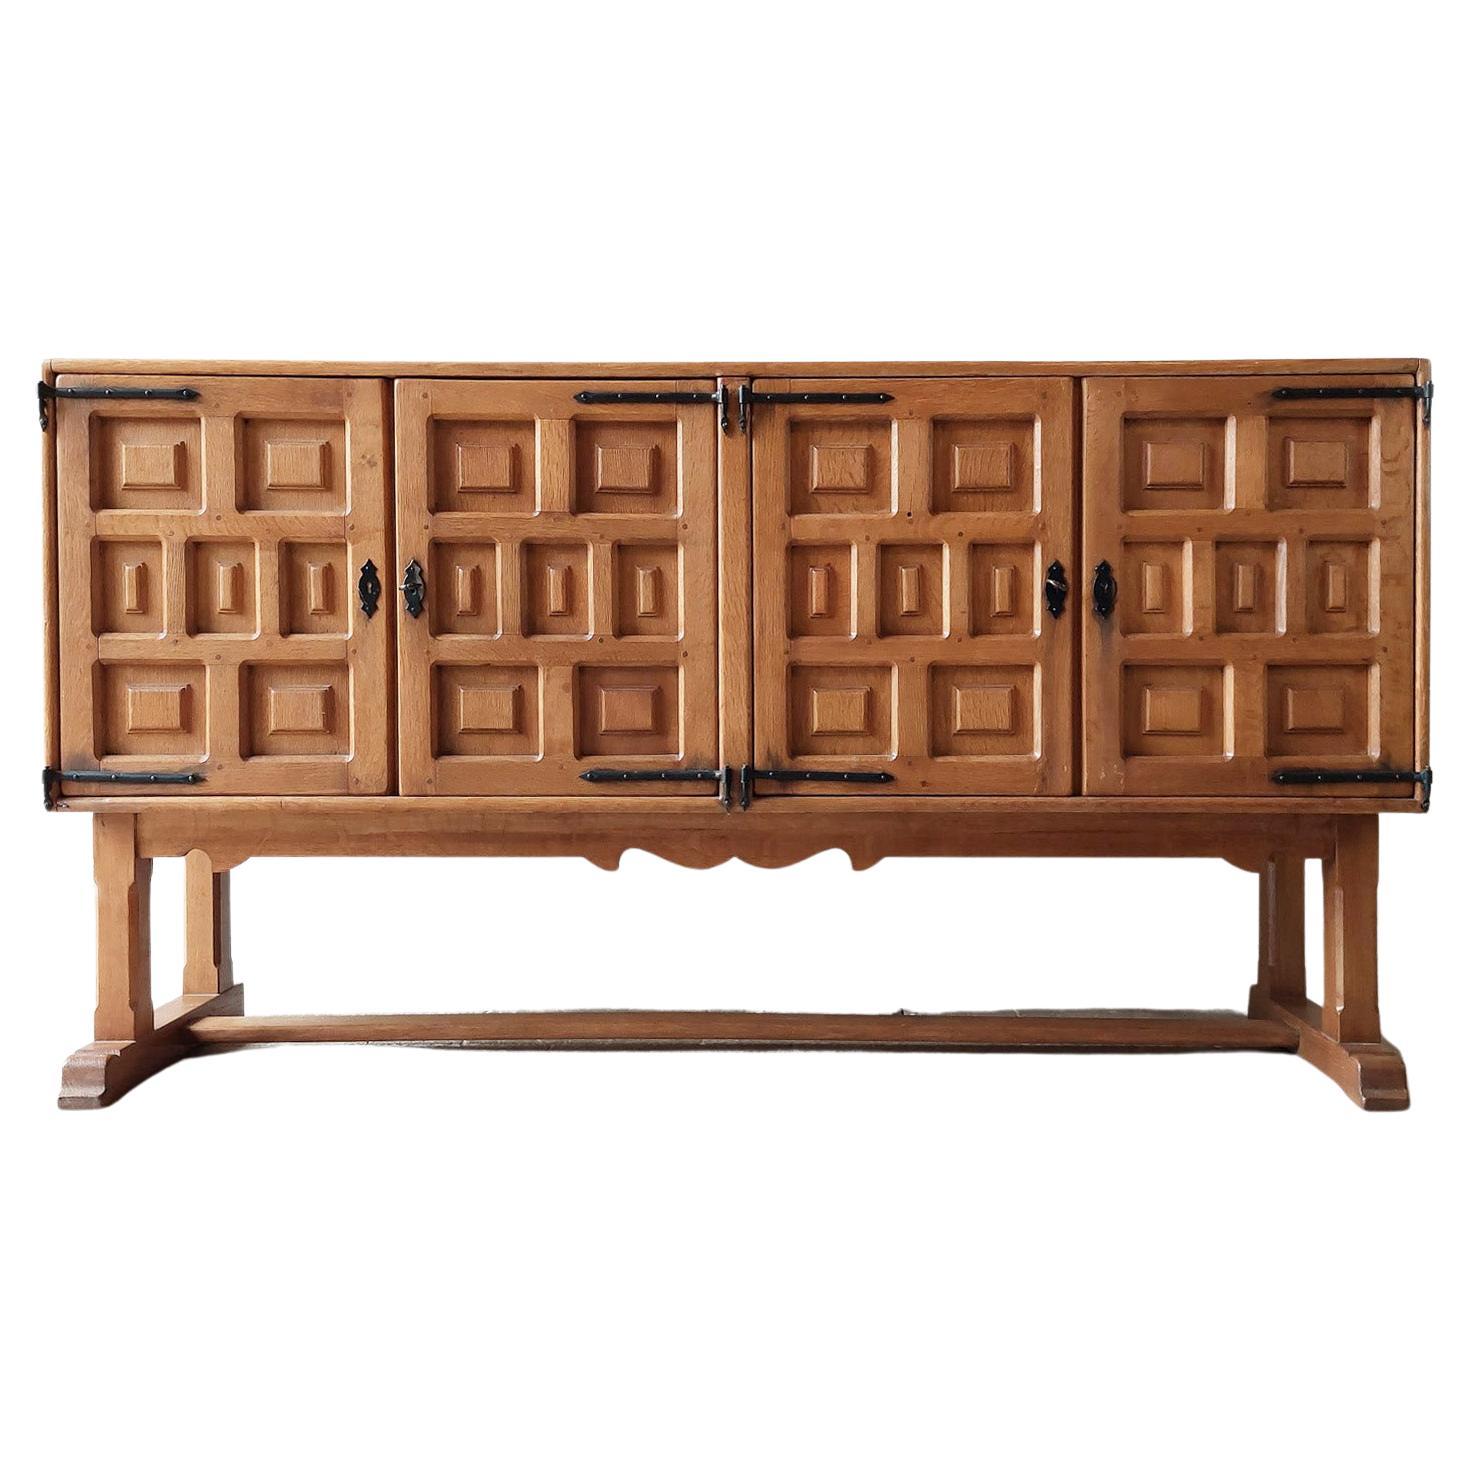 Early 20th Century Spanish Carved Wooden Credenza